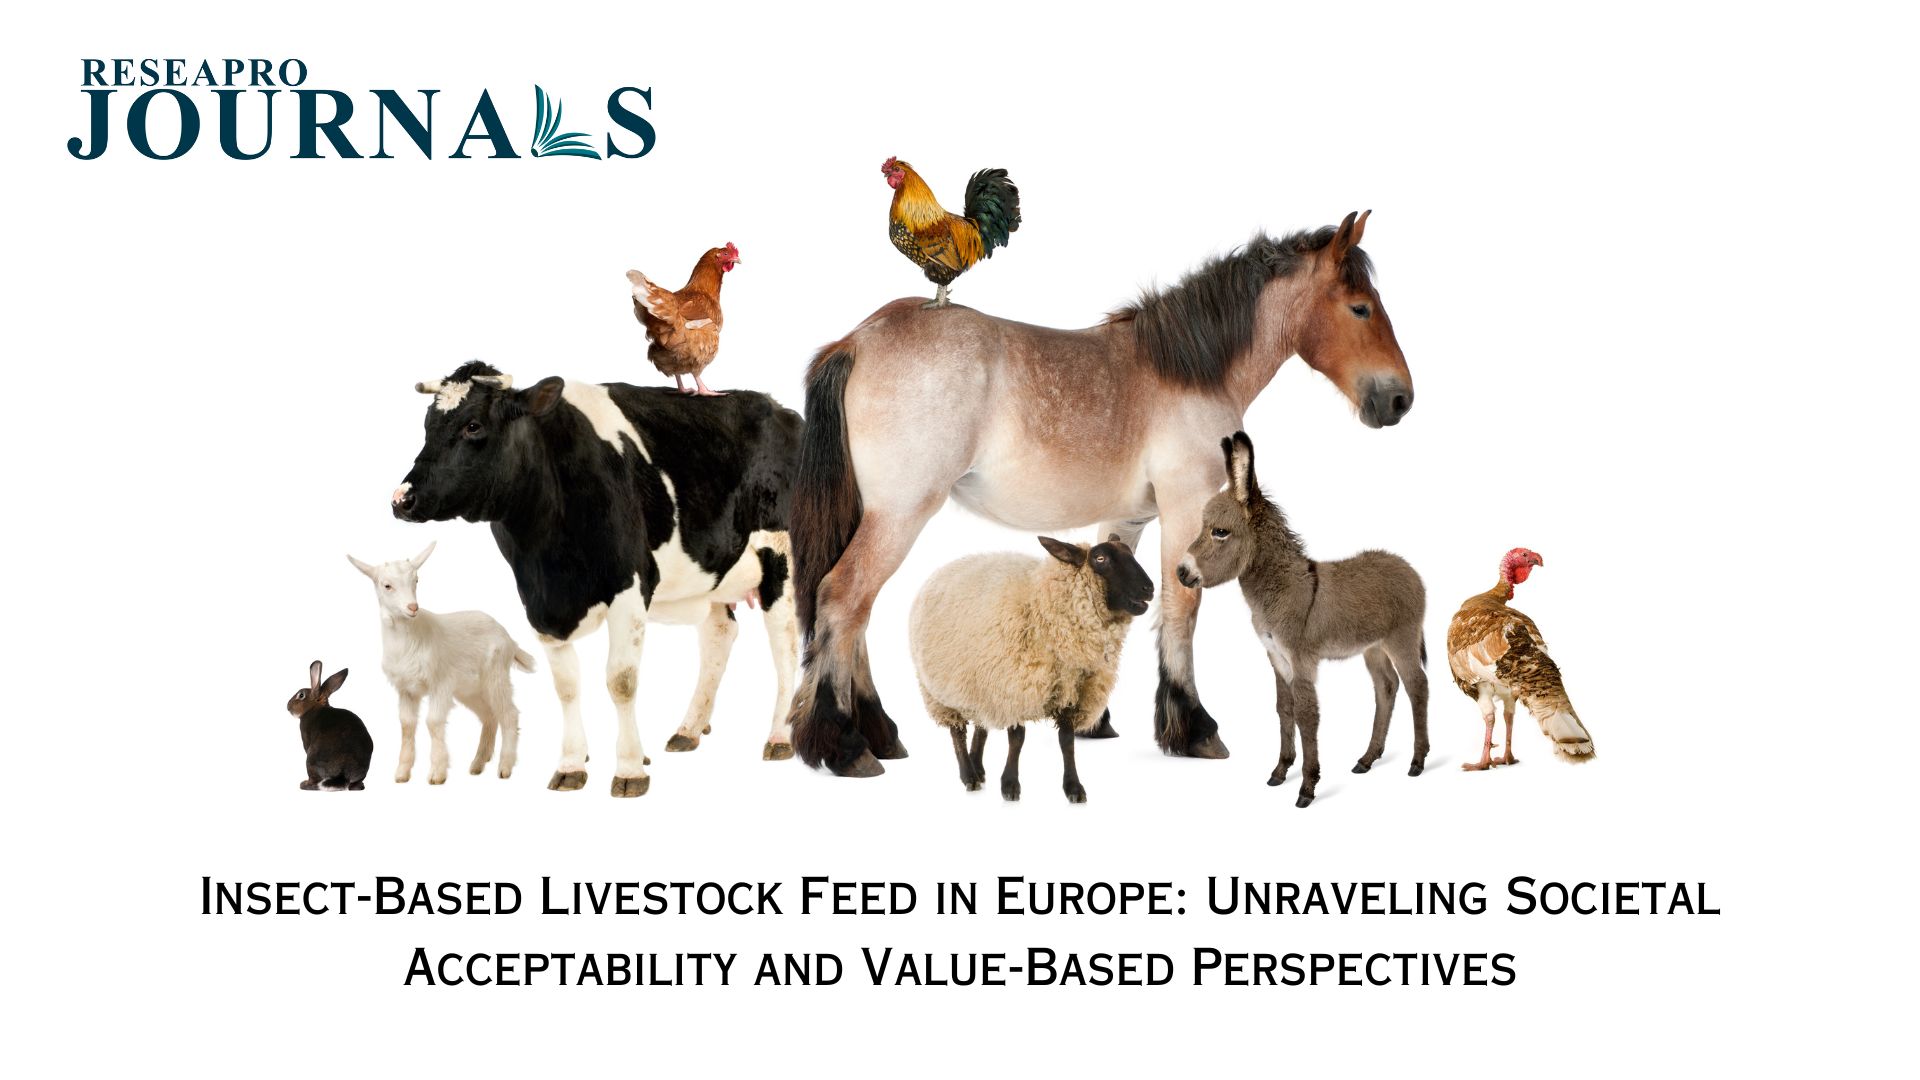 Insect-Based Livestock Feed in Europe: Unraveling Societal Acceptability and Value-Based Perspectives